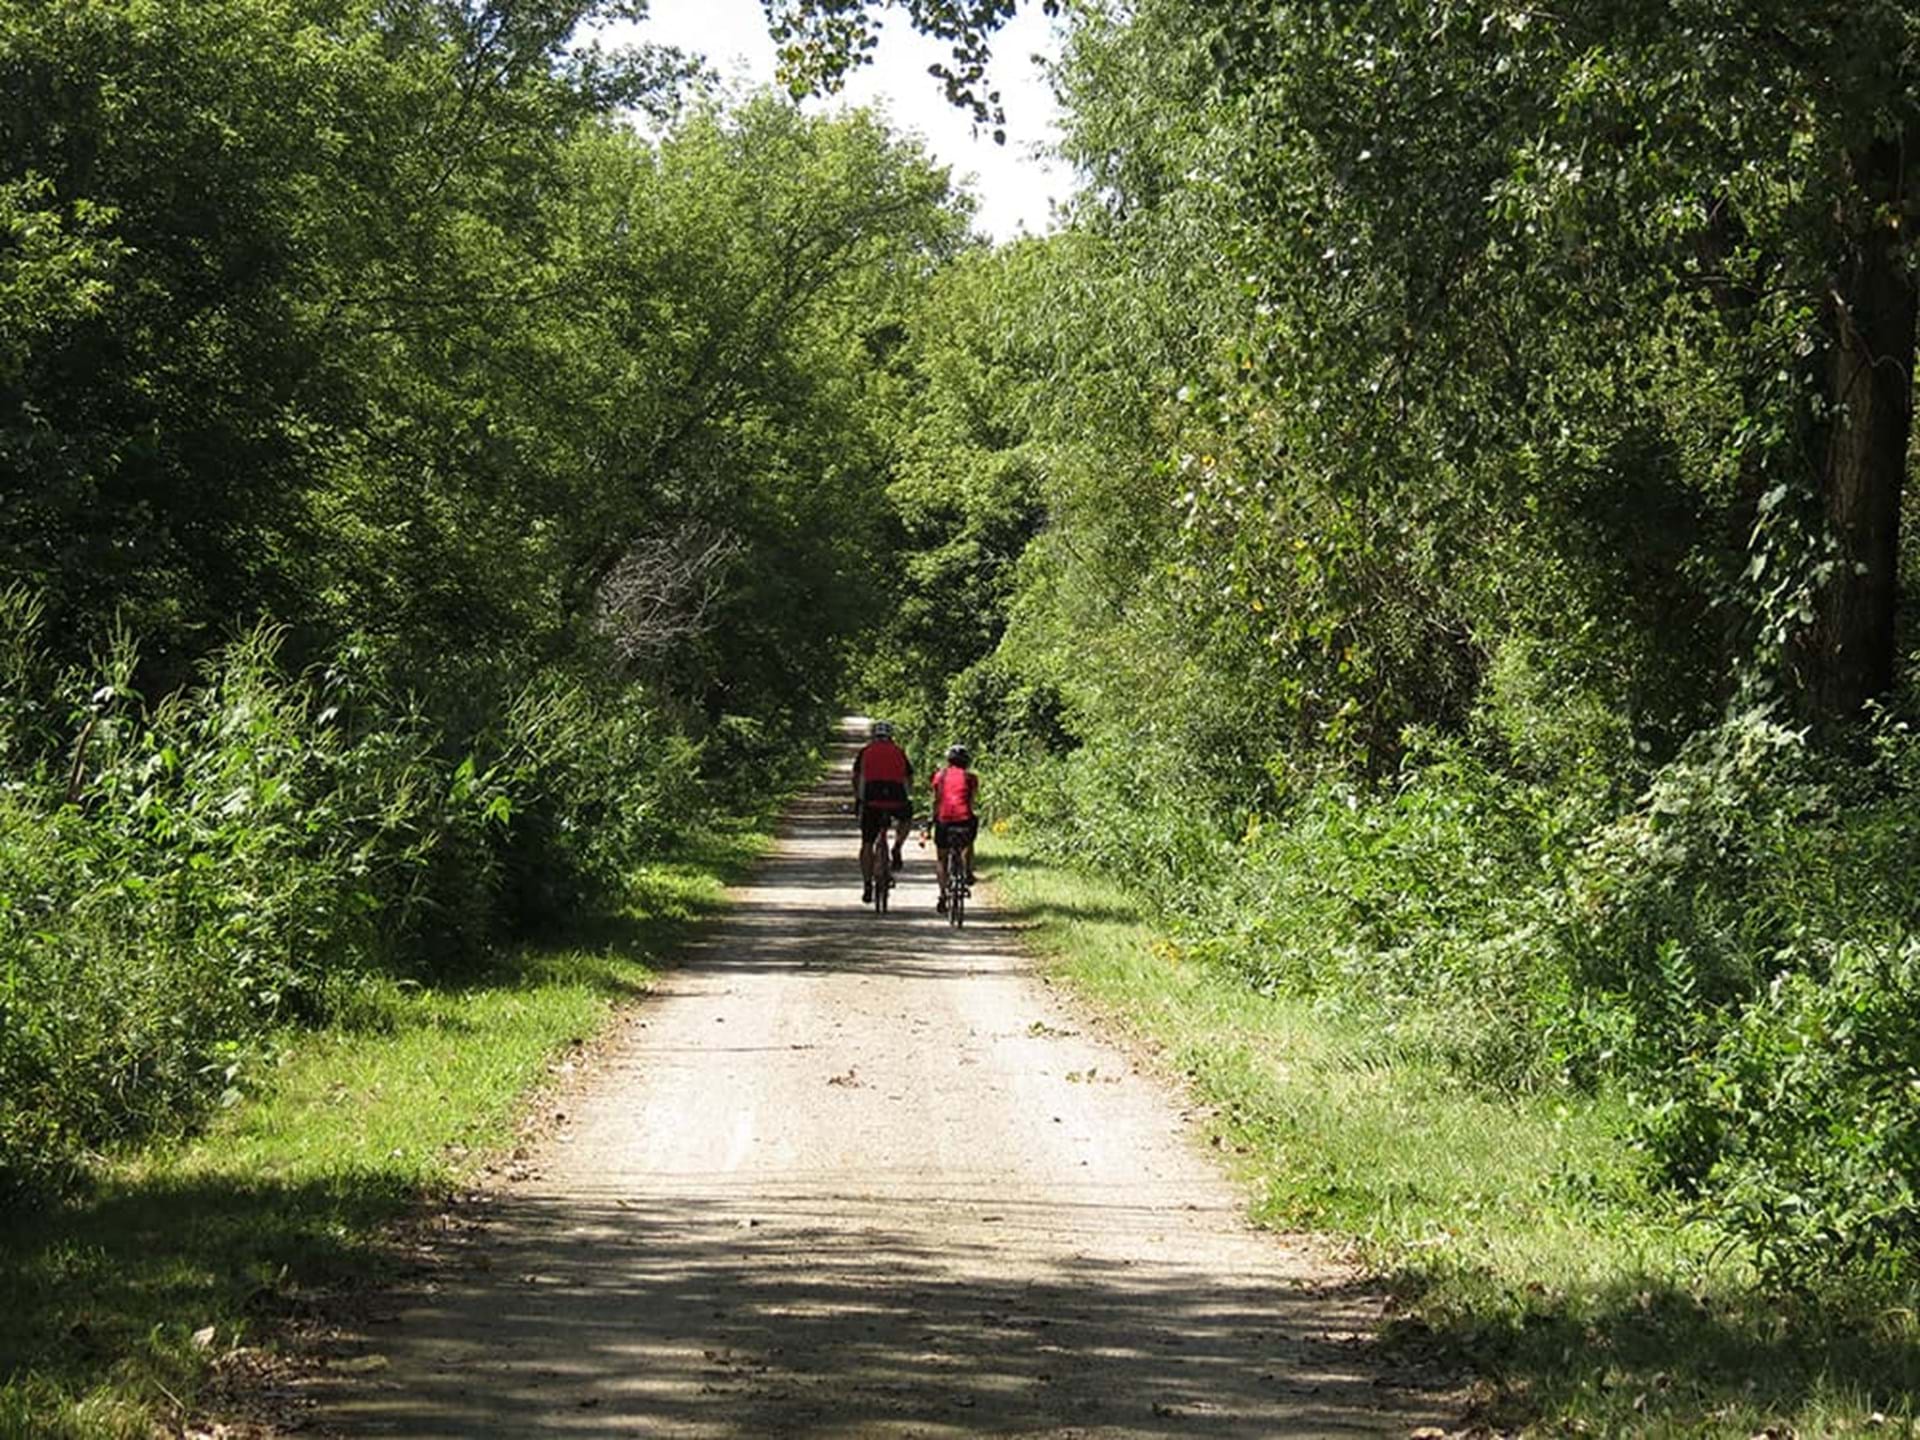 A flat trail with two walkers and trees on either side.